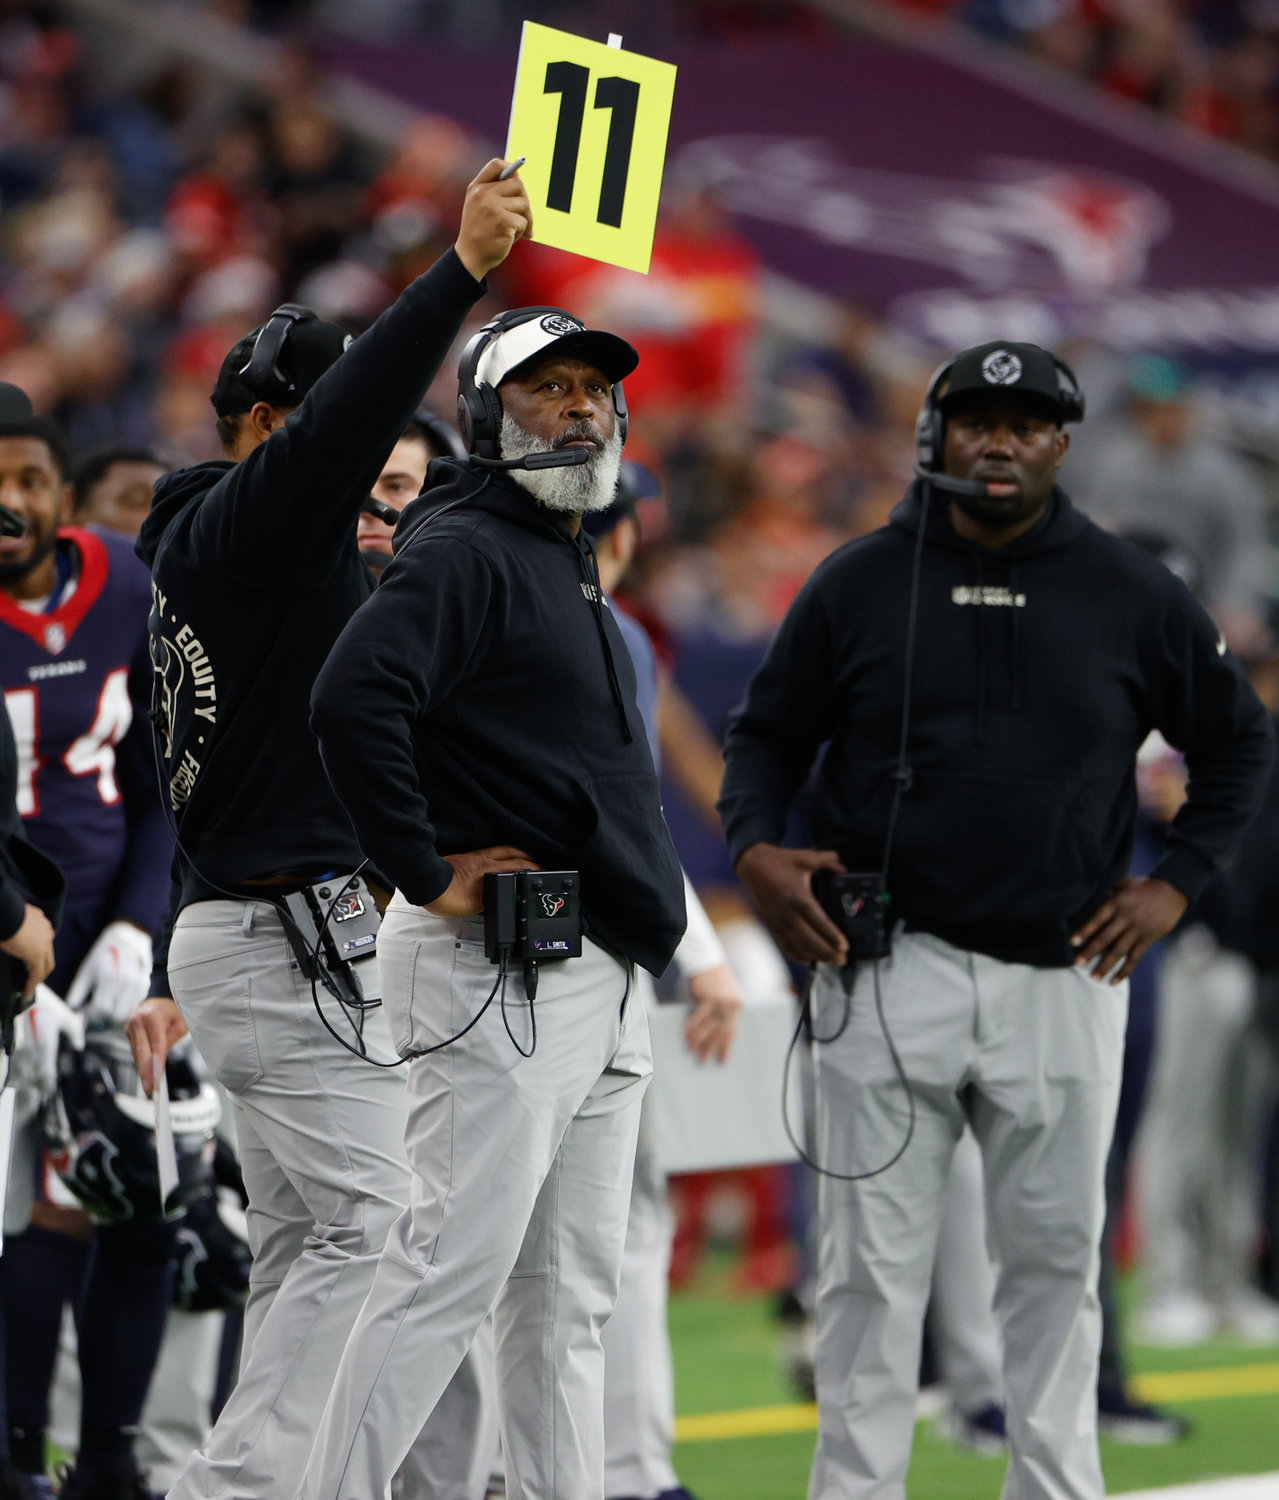 Houston Texans head coach Lovie Smith during an NFL game between the Texans and the Chiefs on Dec. 18, 2022, in Houston. The Chiefs won, 30-24, in overtime.